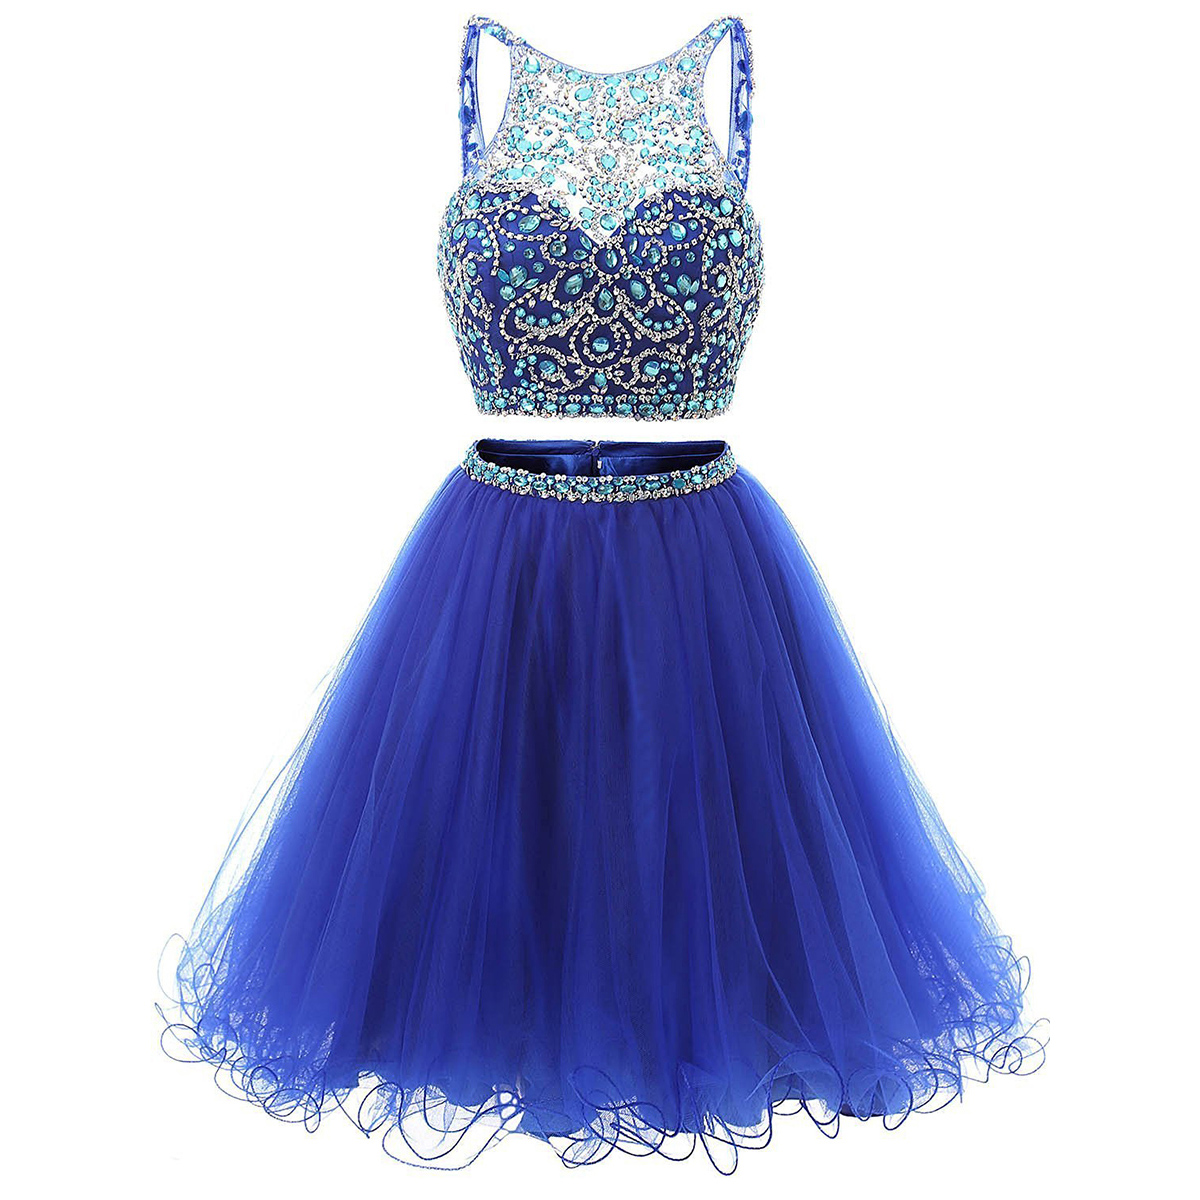 Jewel Neck Illusion Sequins Crystal Prom Dress, Shining Two Piece Low Back Short Prom Dress, Royal Blue Mini Tulle Prom Dress